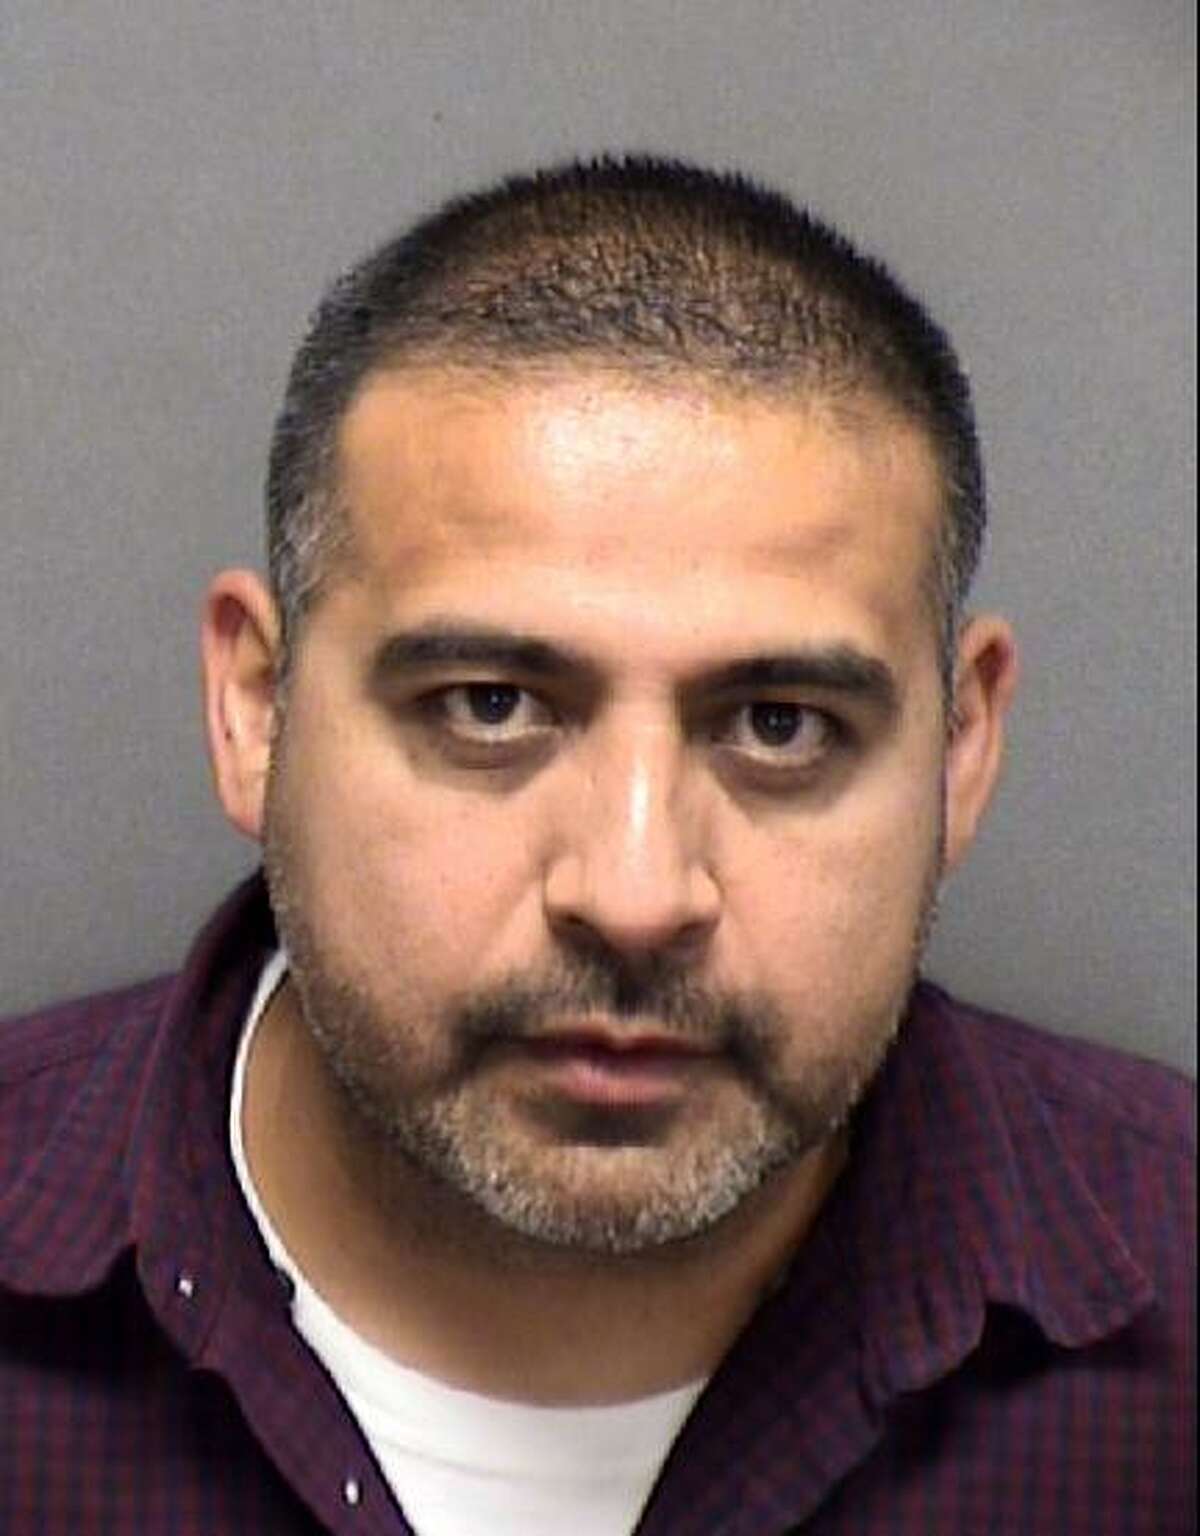 Andrew Sanchez Guerra, 40, arrested in 2020, will be tried this week on a charge of sexual assault of a child under 17.